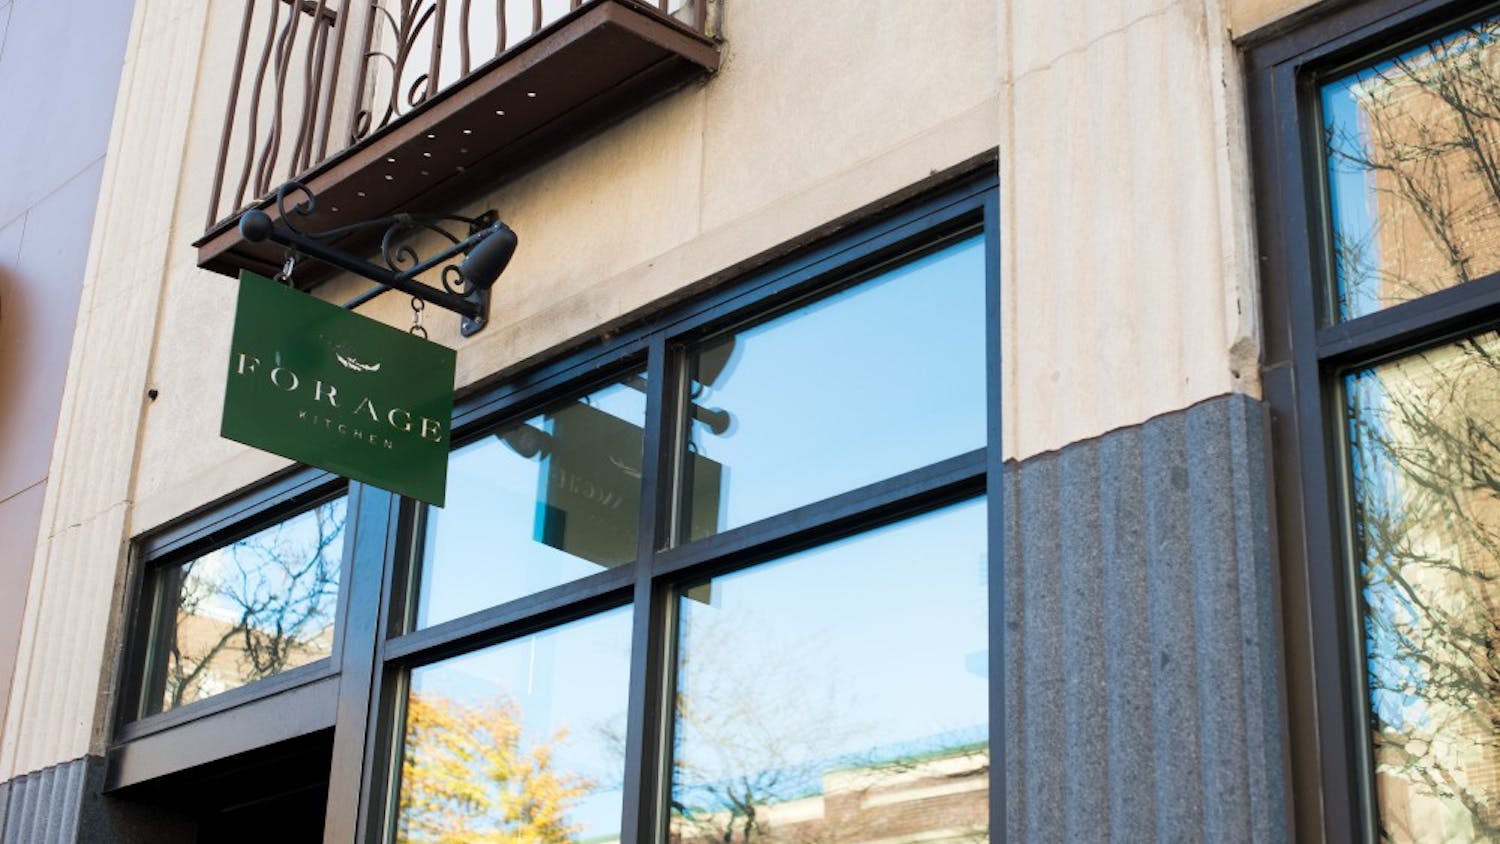 Forage Kitchen is a new restaurant on State Street that values bringing convenience and a ordability to students.